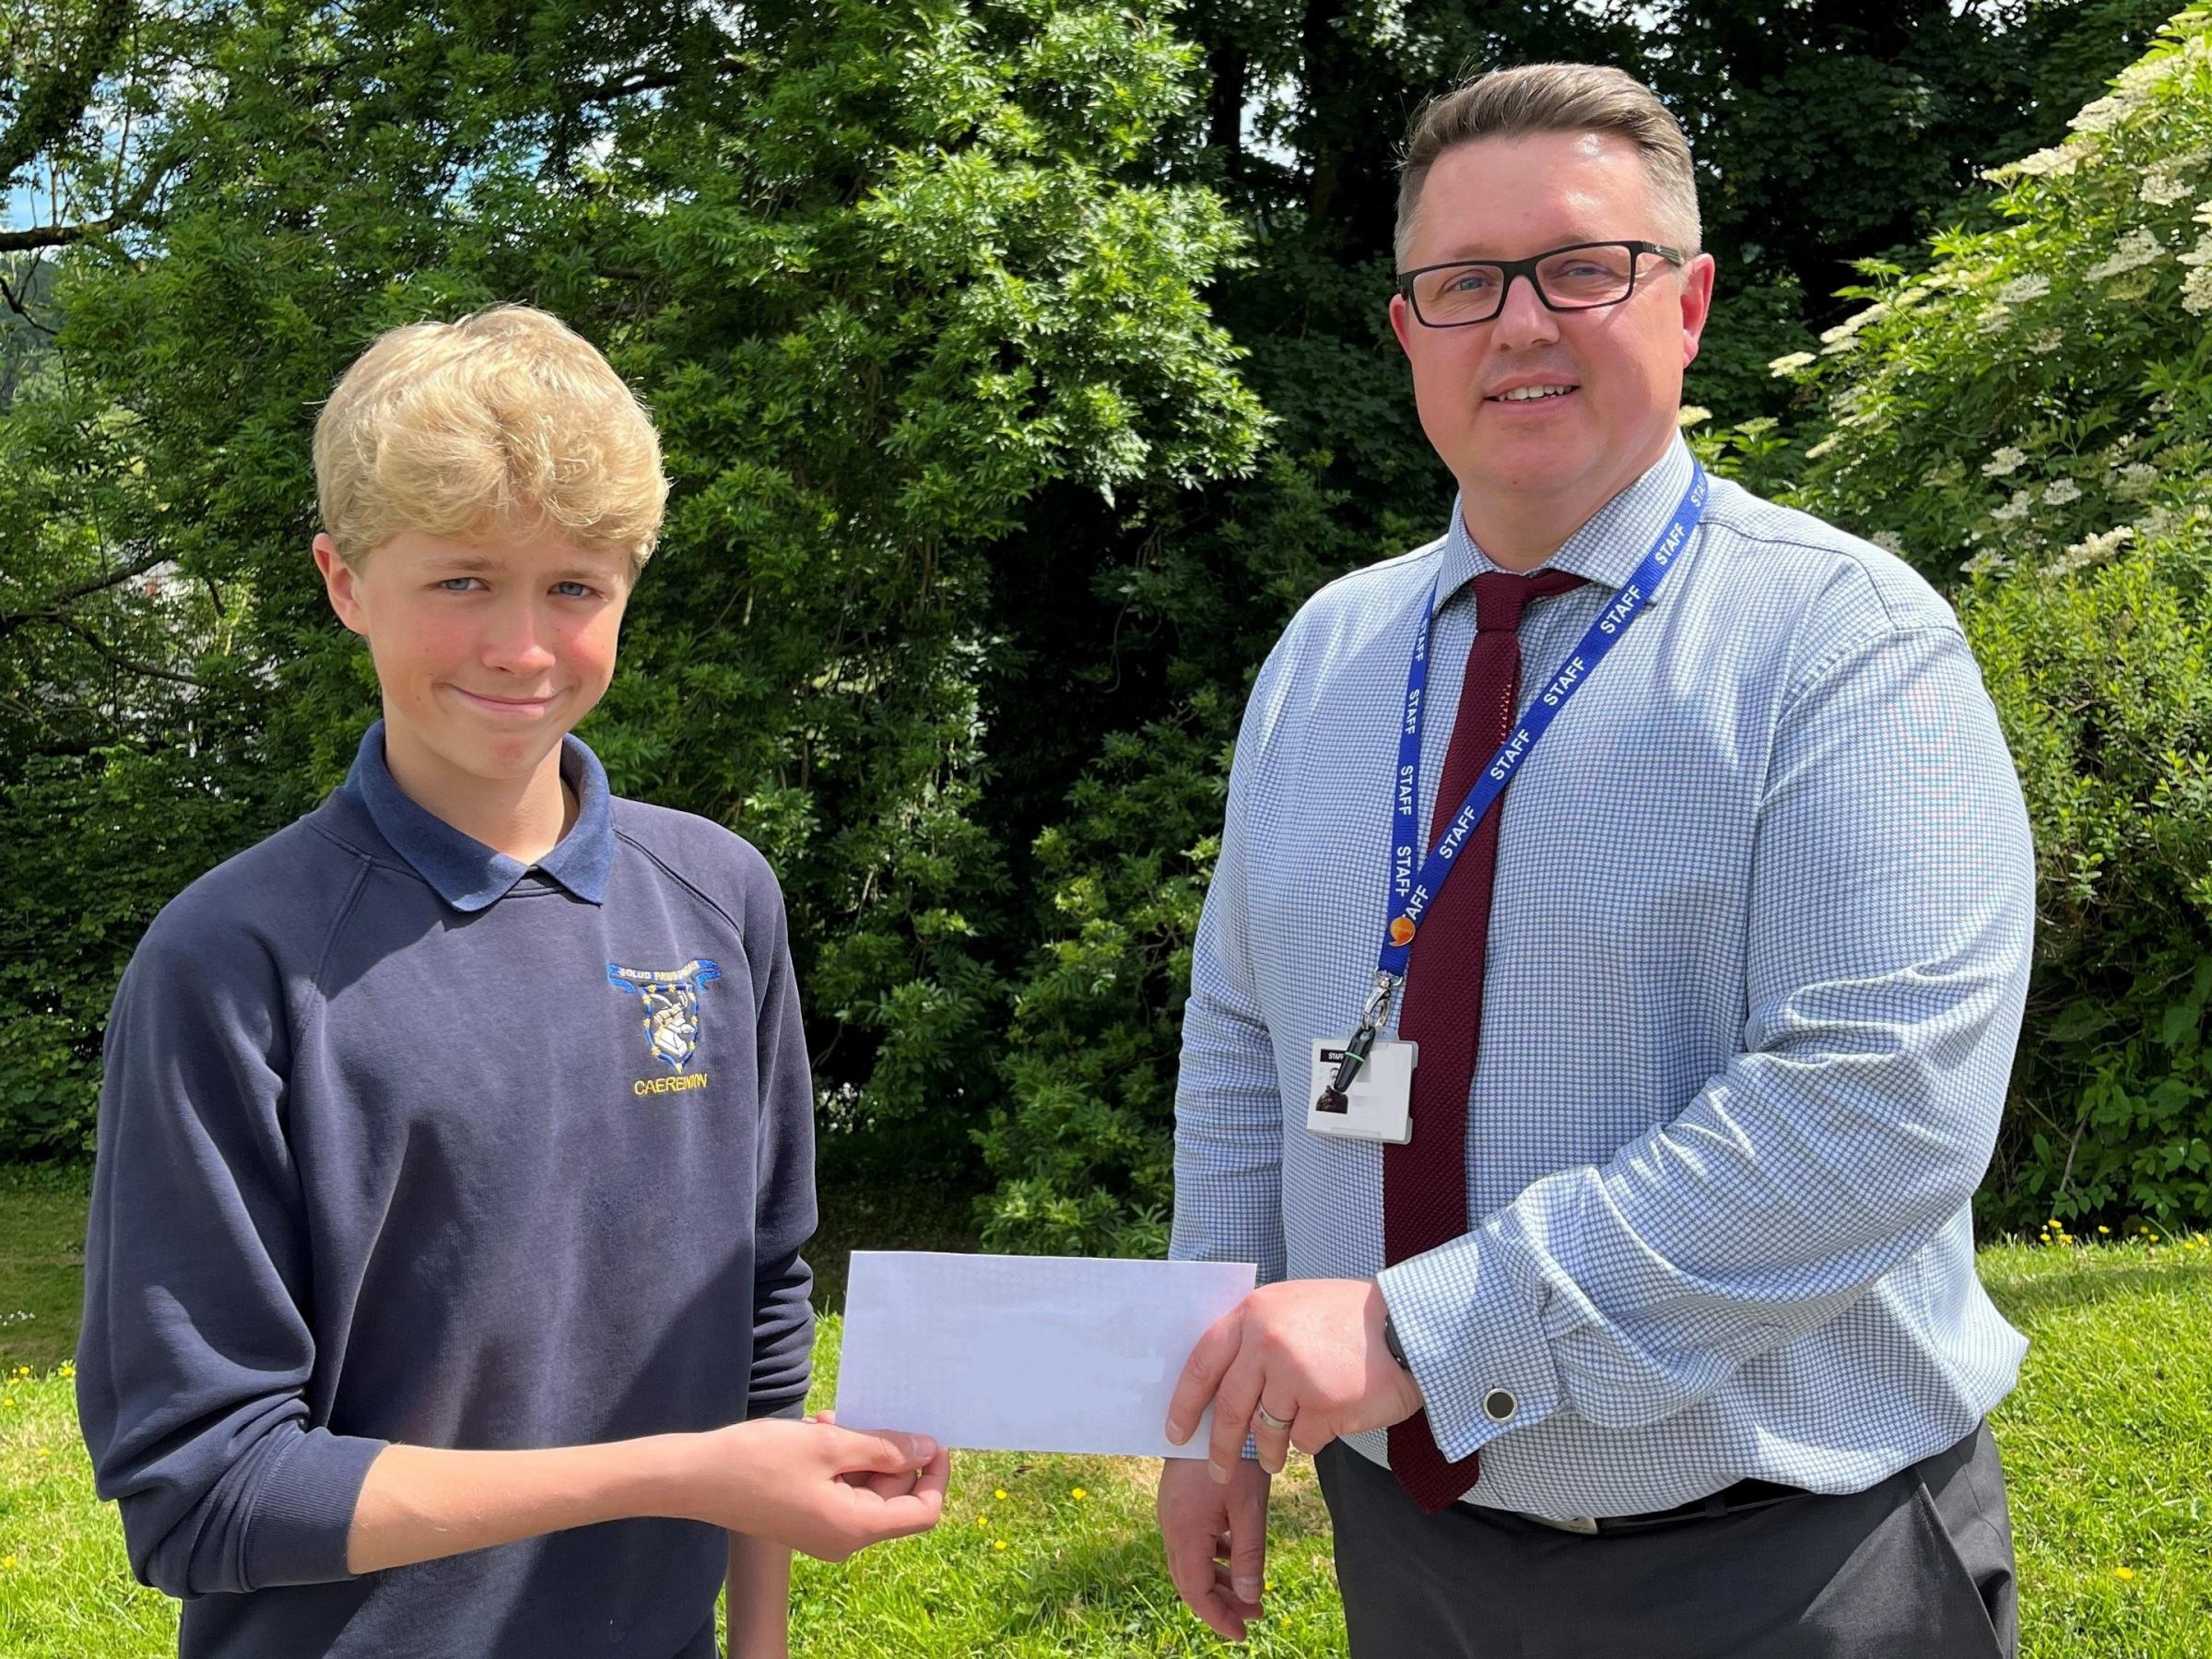 Alaw Francis, 14, whose winning design forms the basis of the new Ysgol Bro Caereinion logo, is presented with his prize by Huw Lloyd-Jones, Headteacher of Ysgol Bro Caereinion.